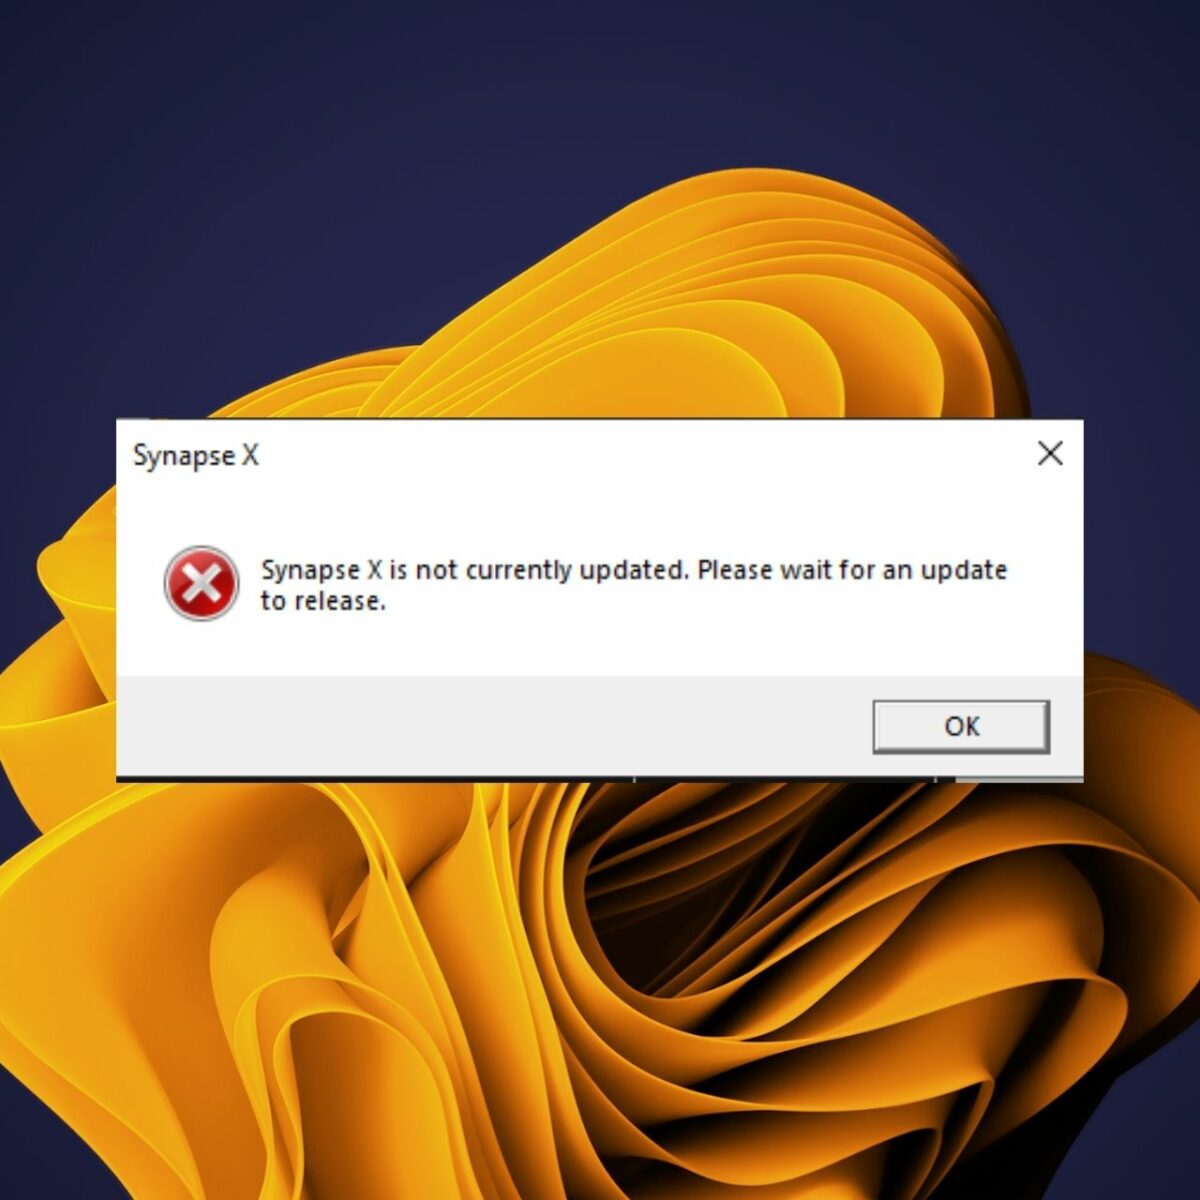 How To Fix Synapse X Is Not Currently Updated Please Wait For An Update To  Release 